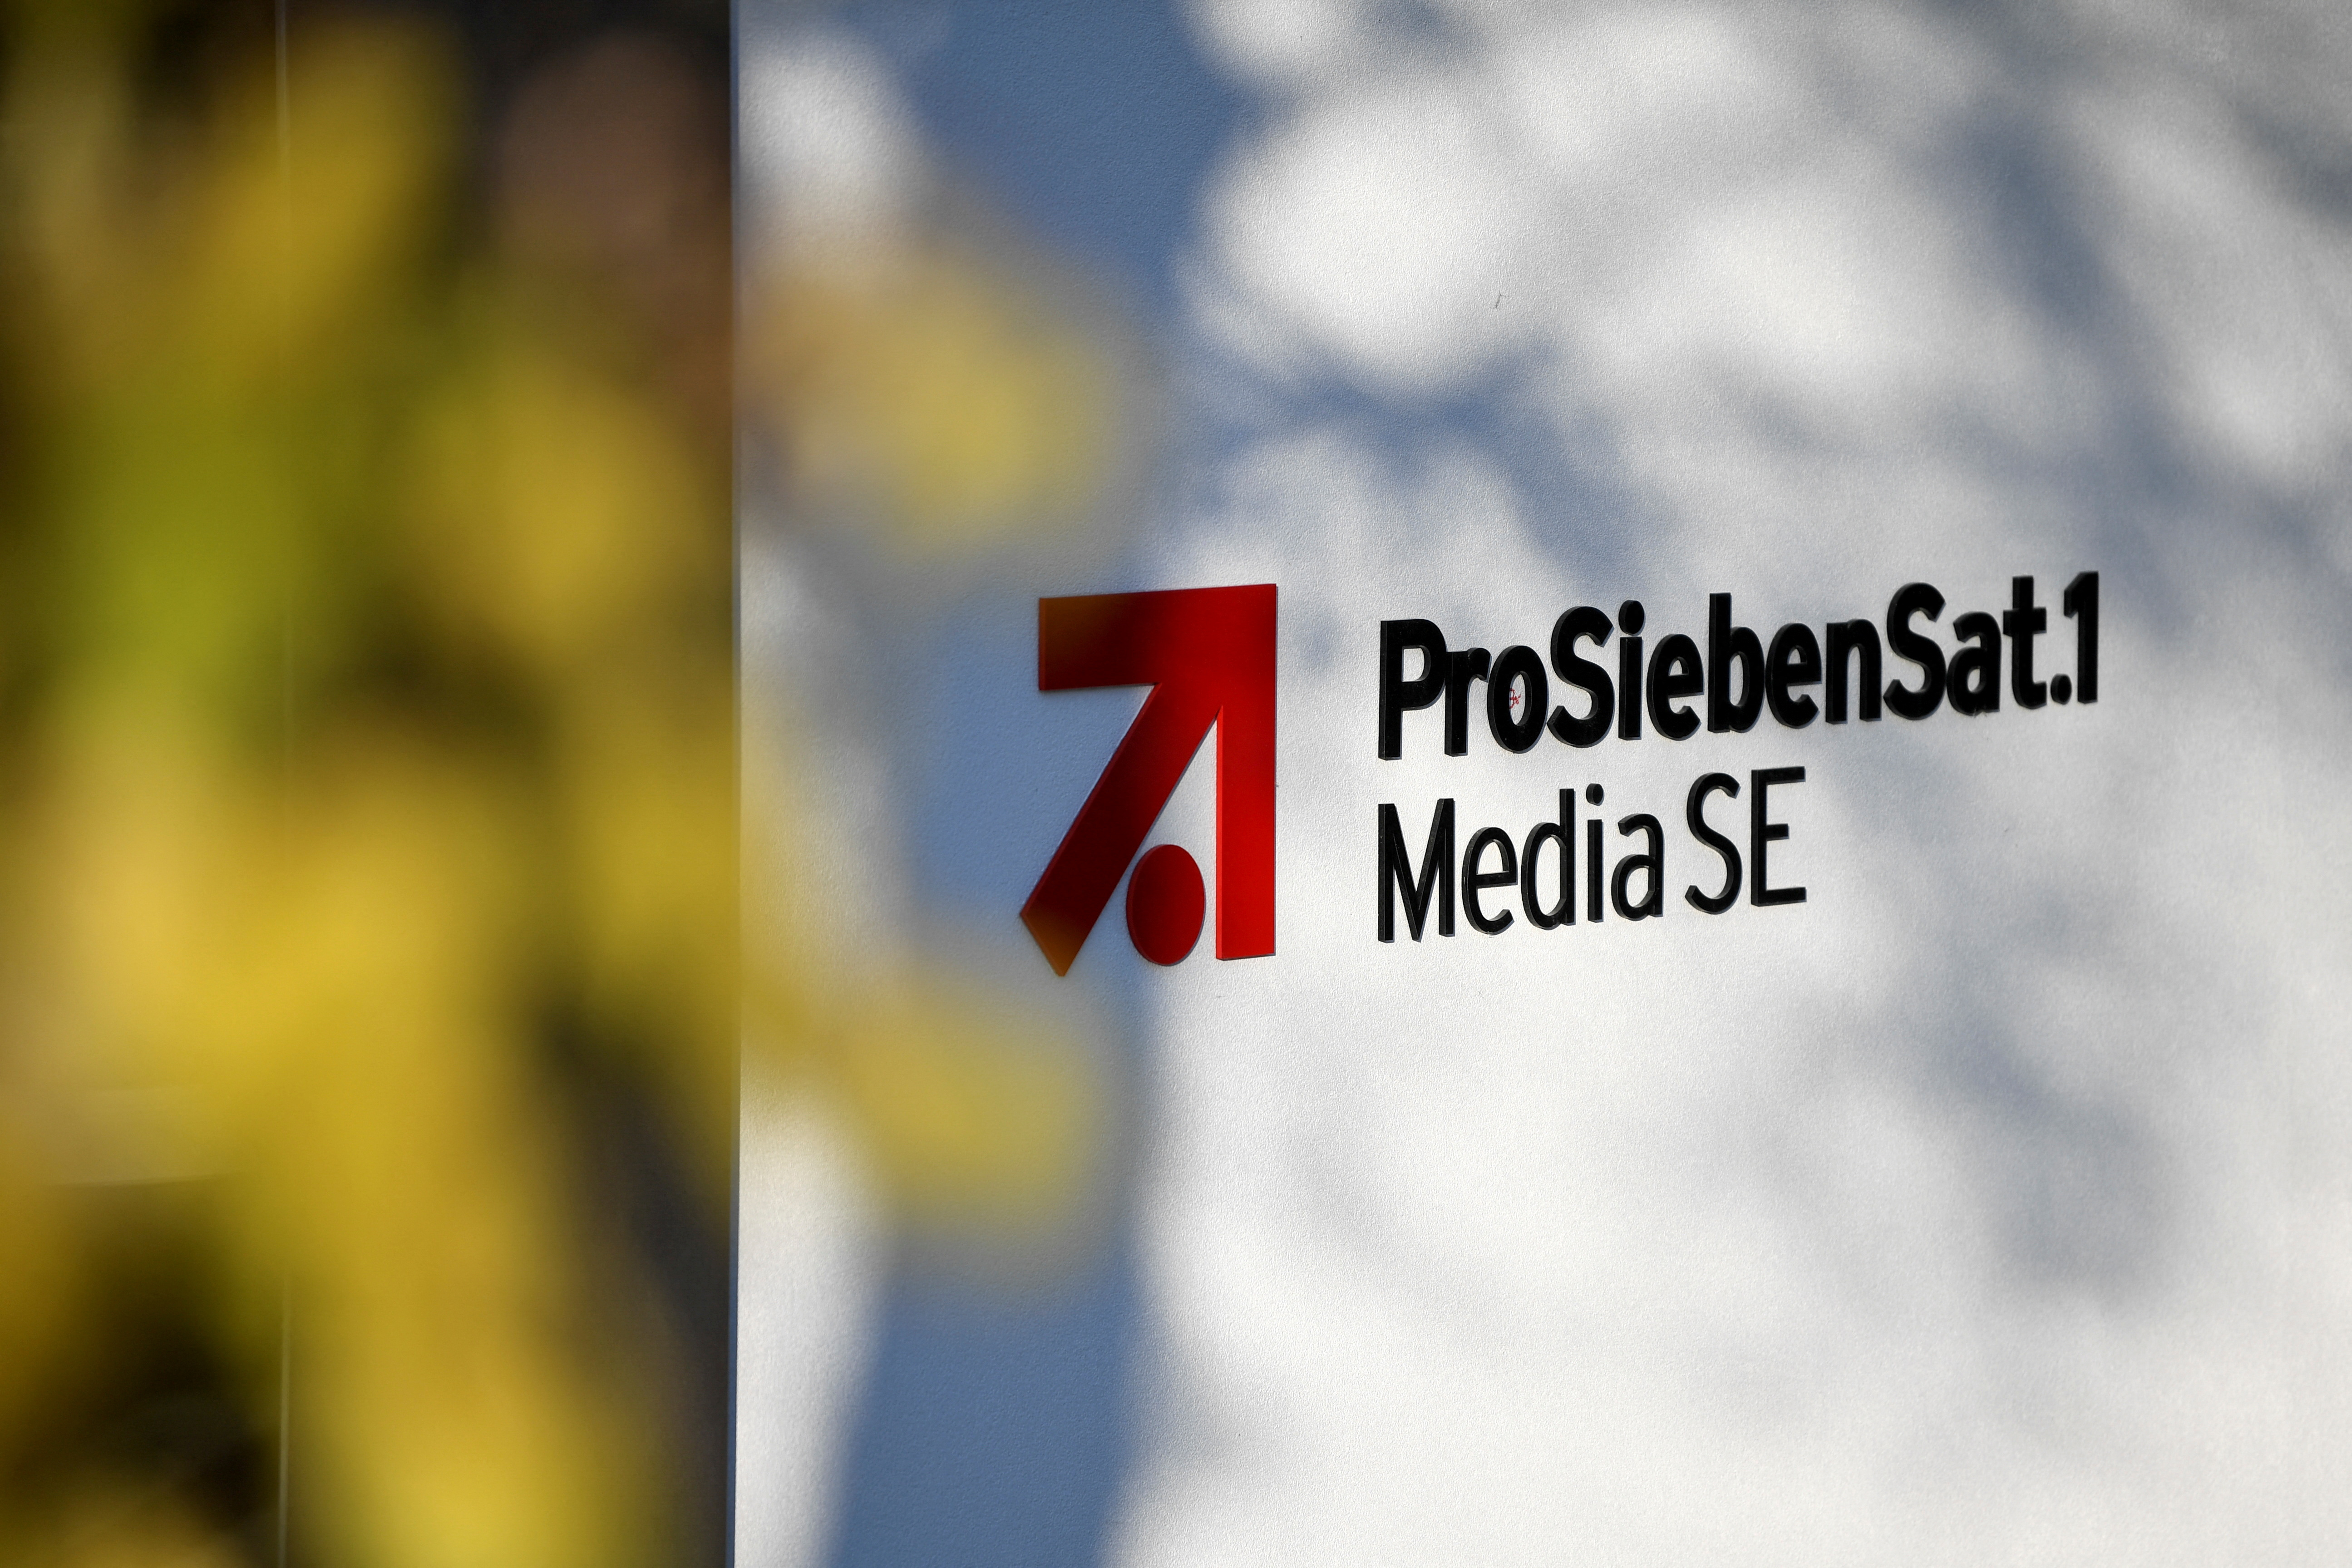 The logo of German media company ProSiebenSat.1 is seen in front of the headquarters in Unterfoehring